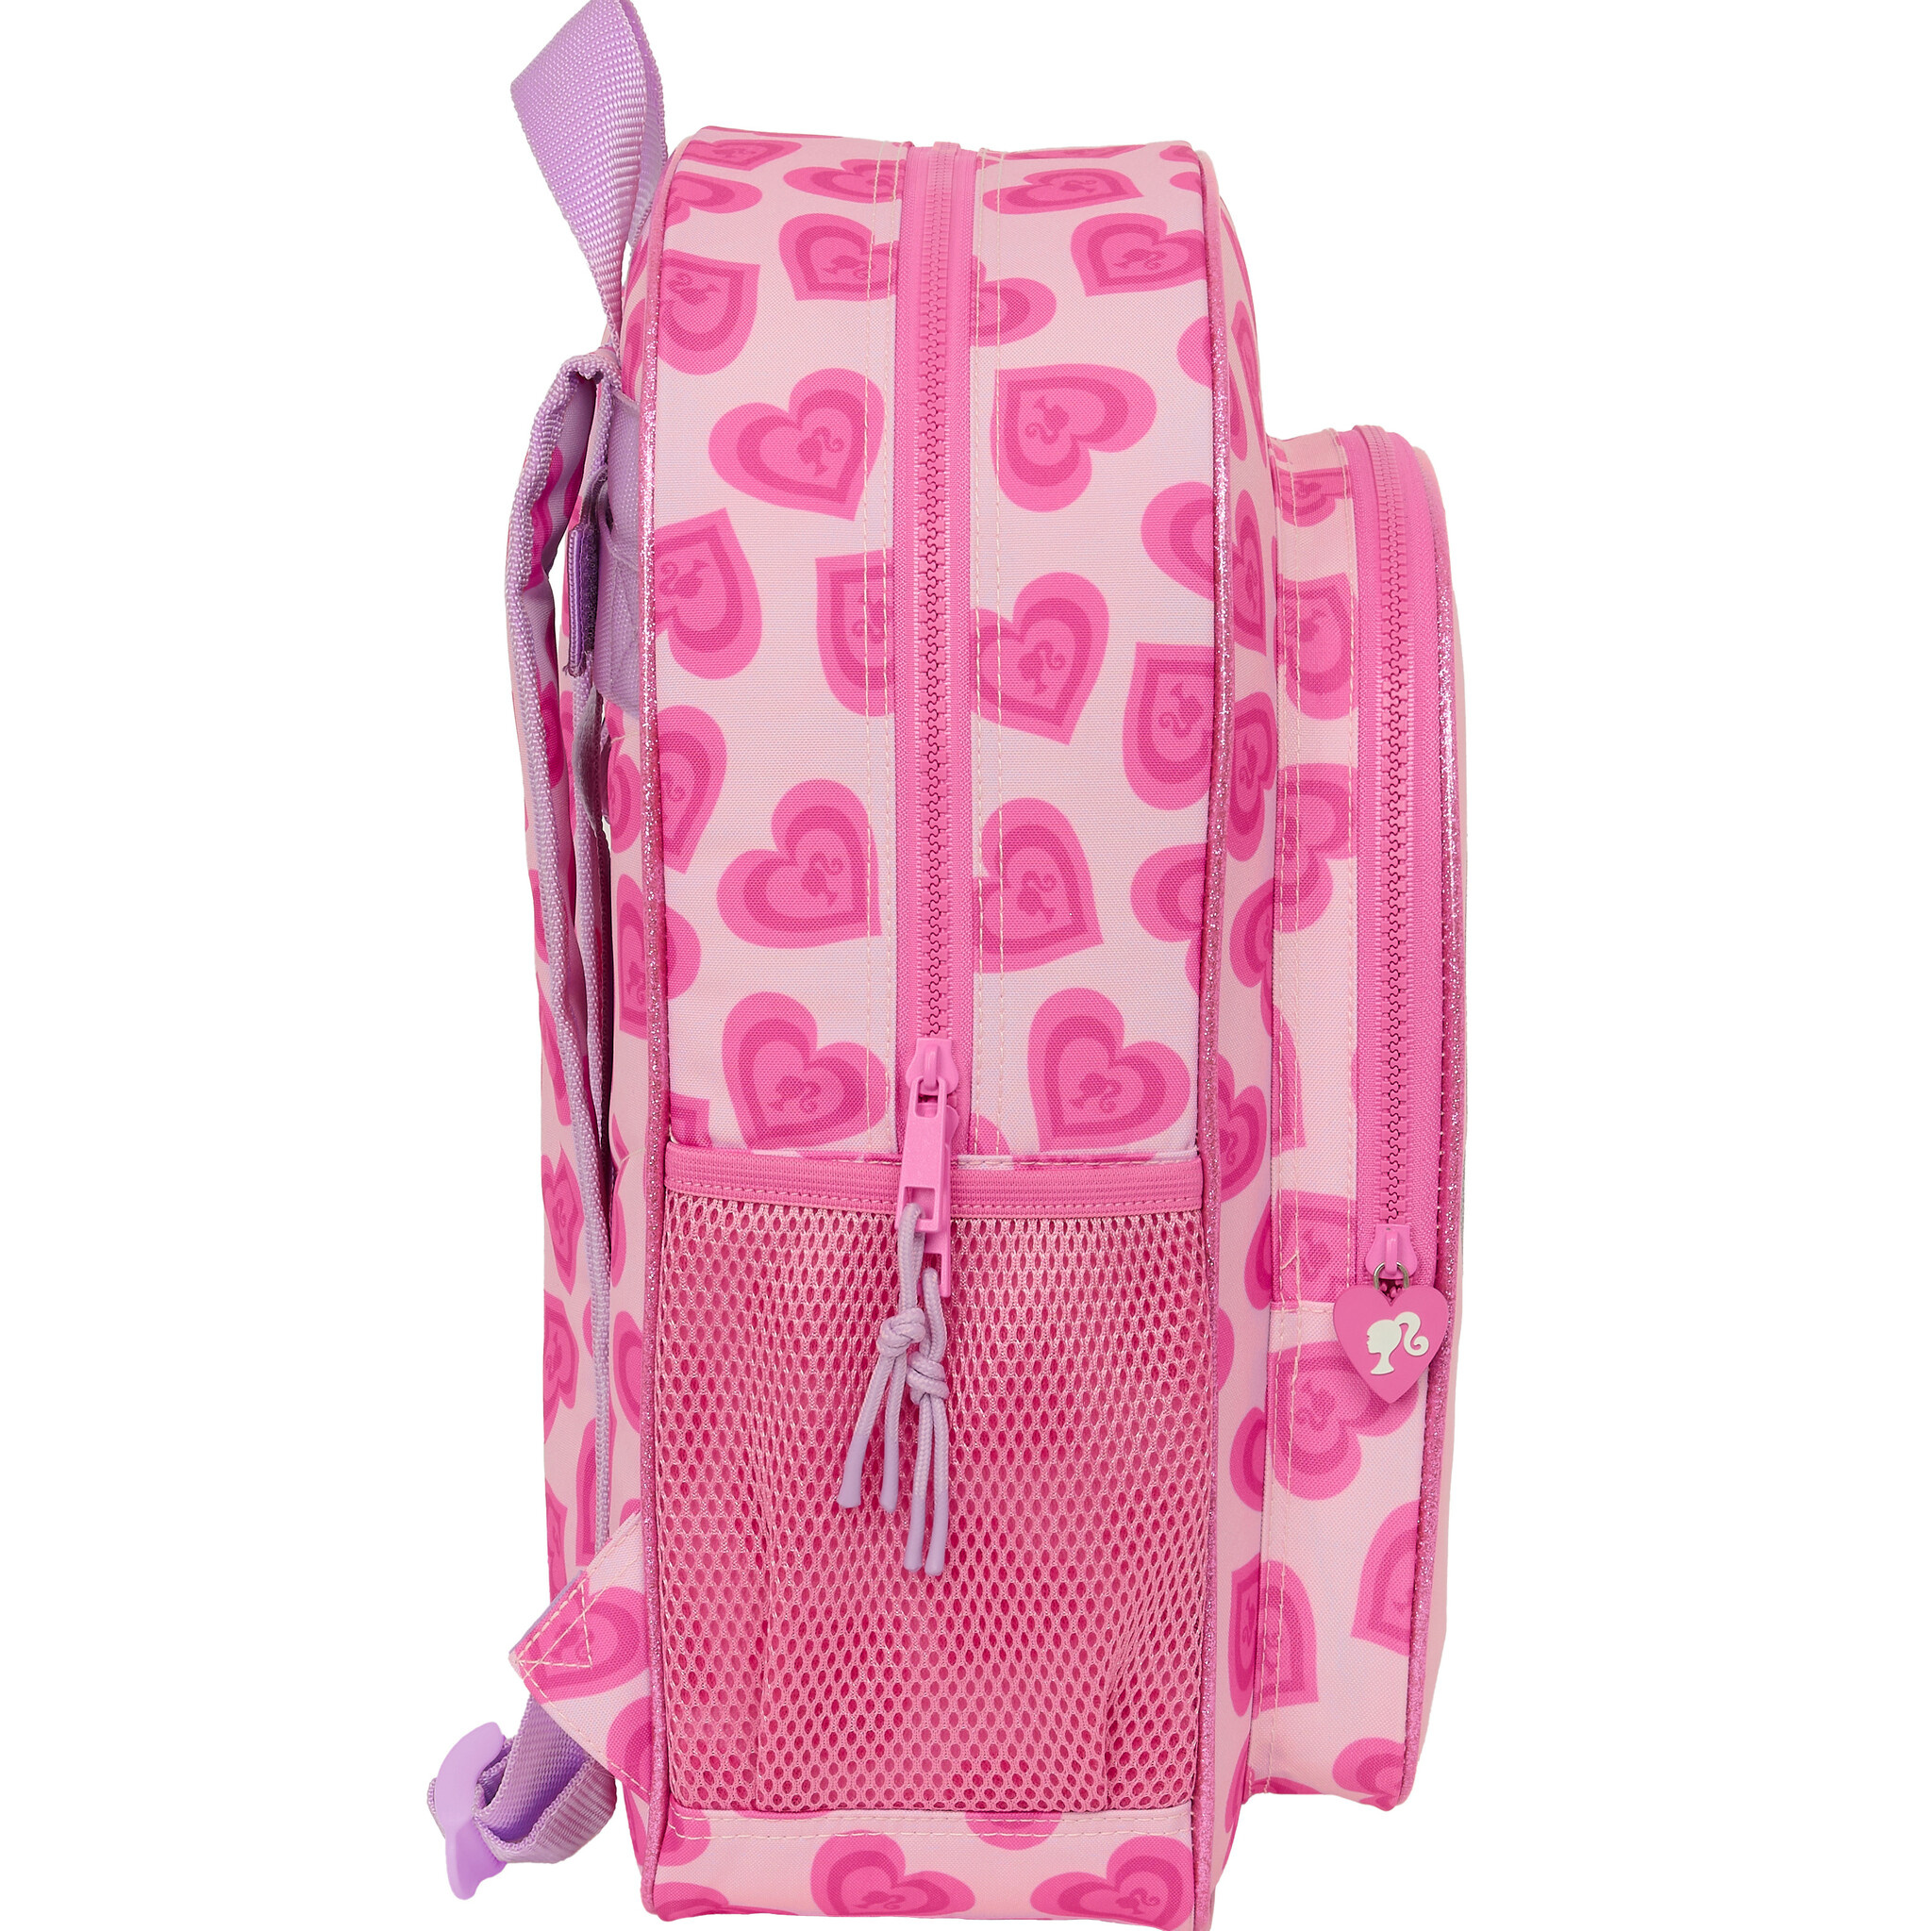 Barbie Backpack, Love - 38 x 32 x 12 cm - Polyester